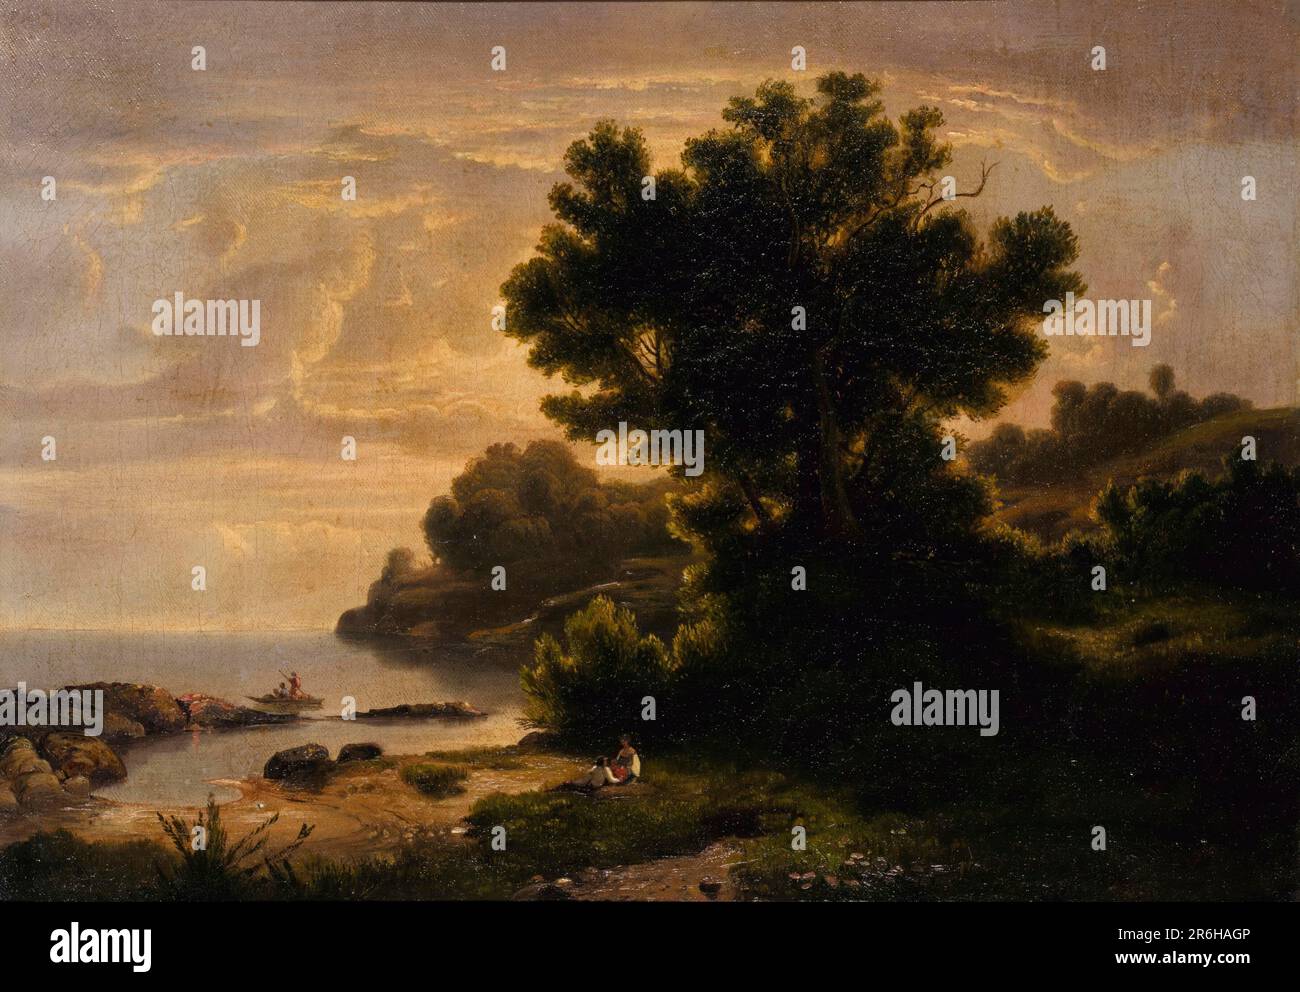 Landscape with Family by Lake. oil on canvas. Date: 1858. Museum: Smithsonian American Art Museum. Stock Photo